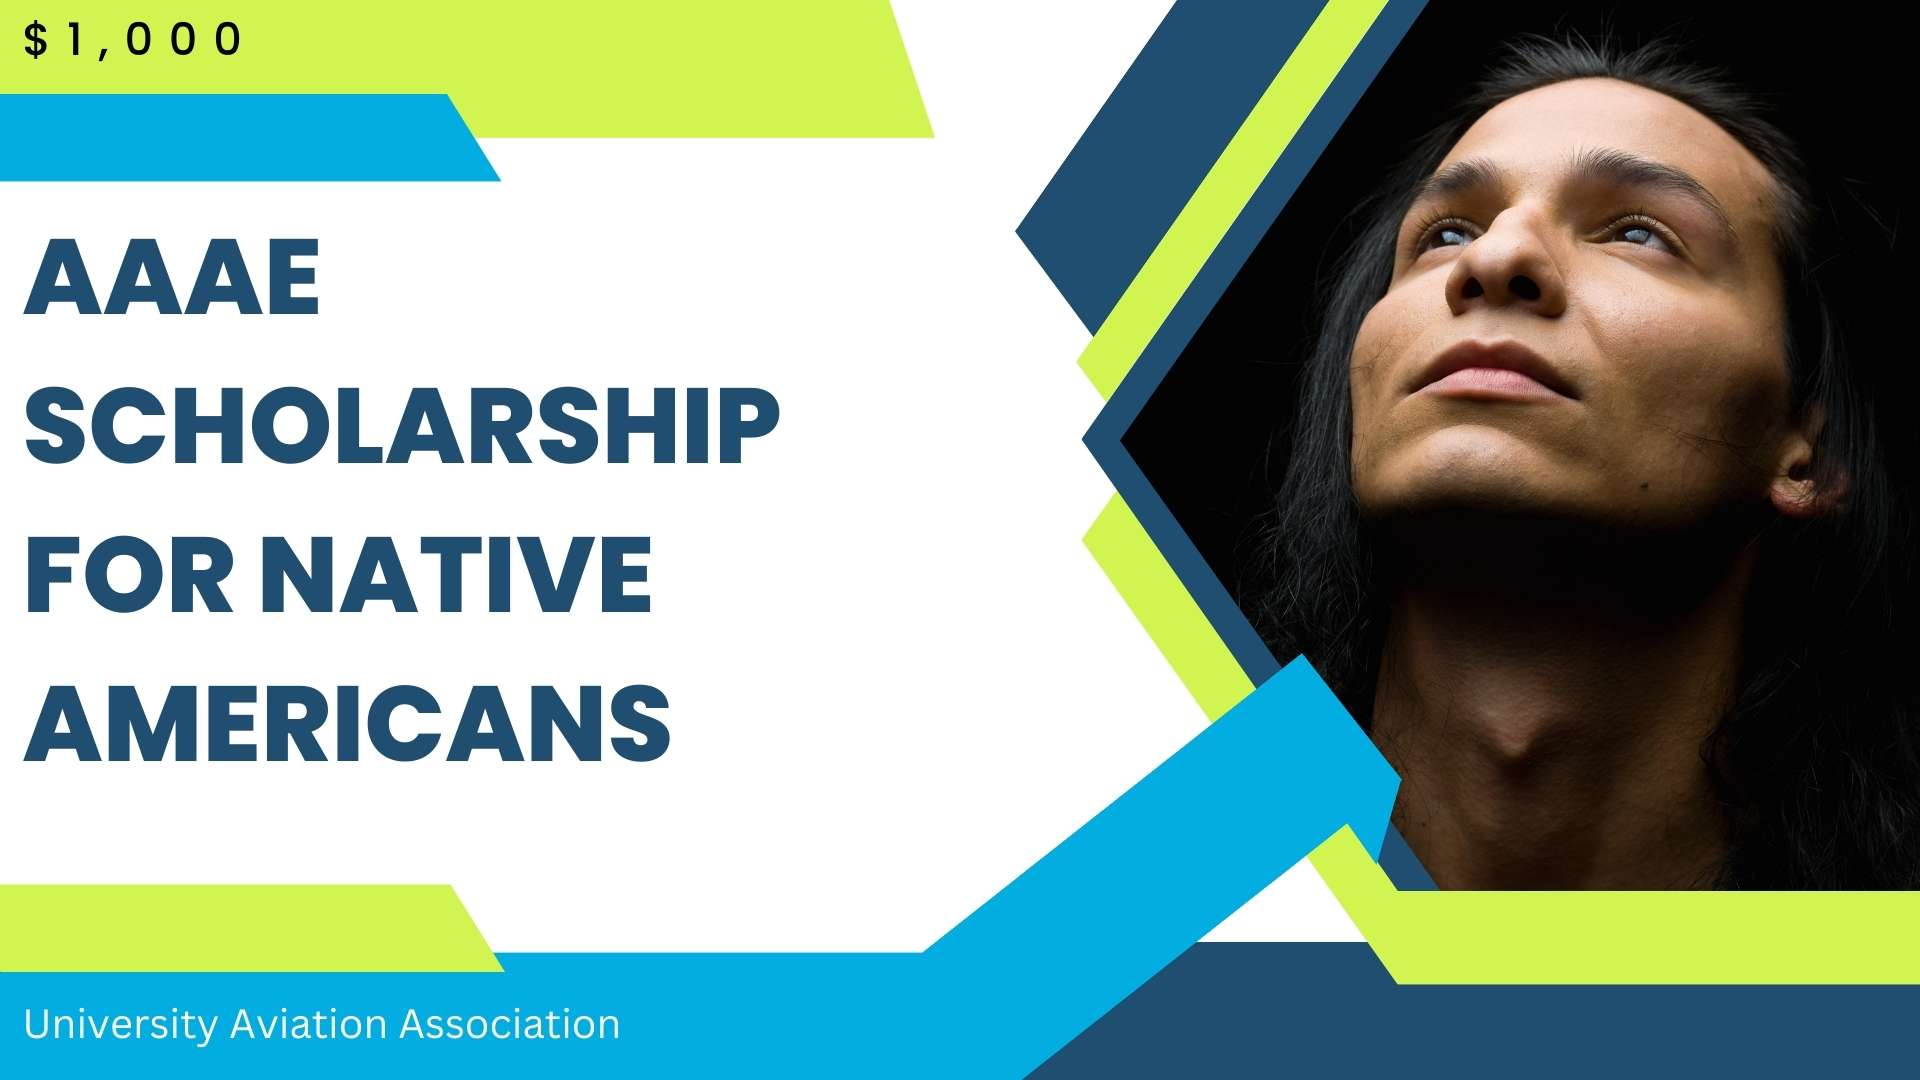 AAAE Scholarship for Native Americans